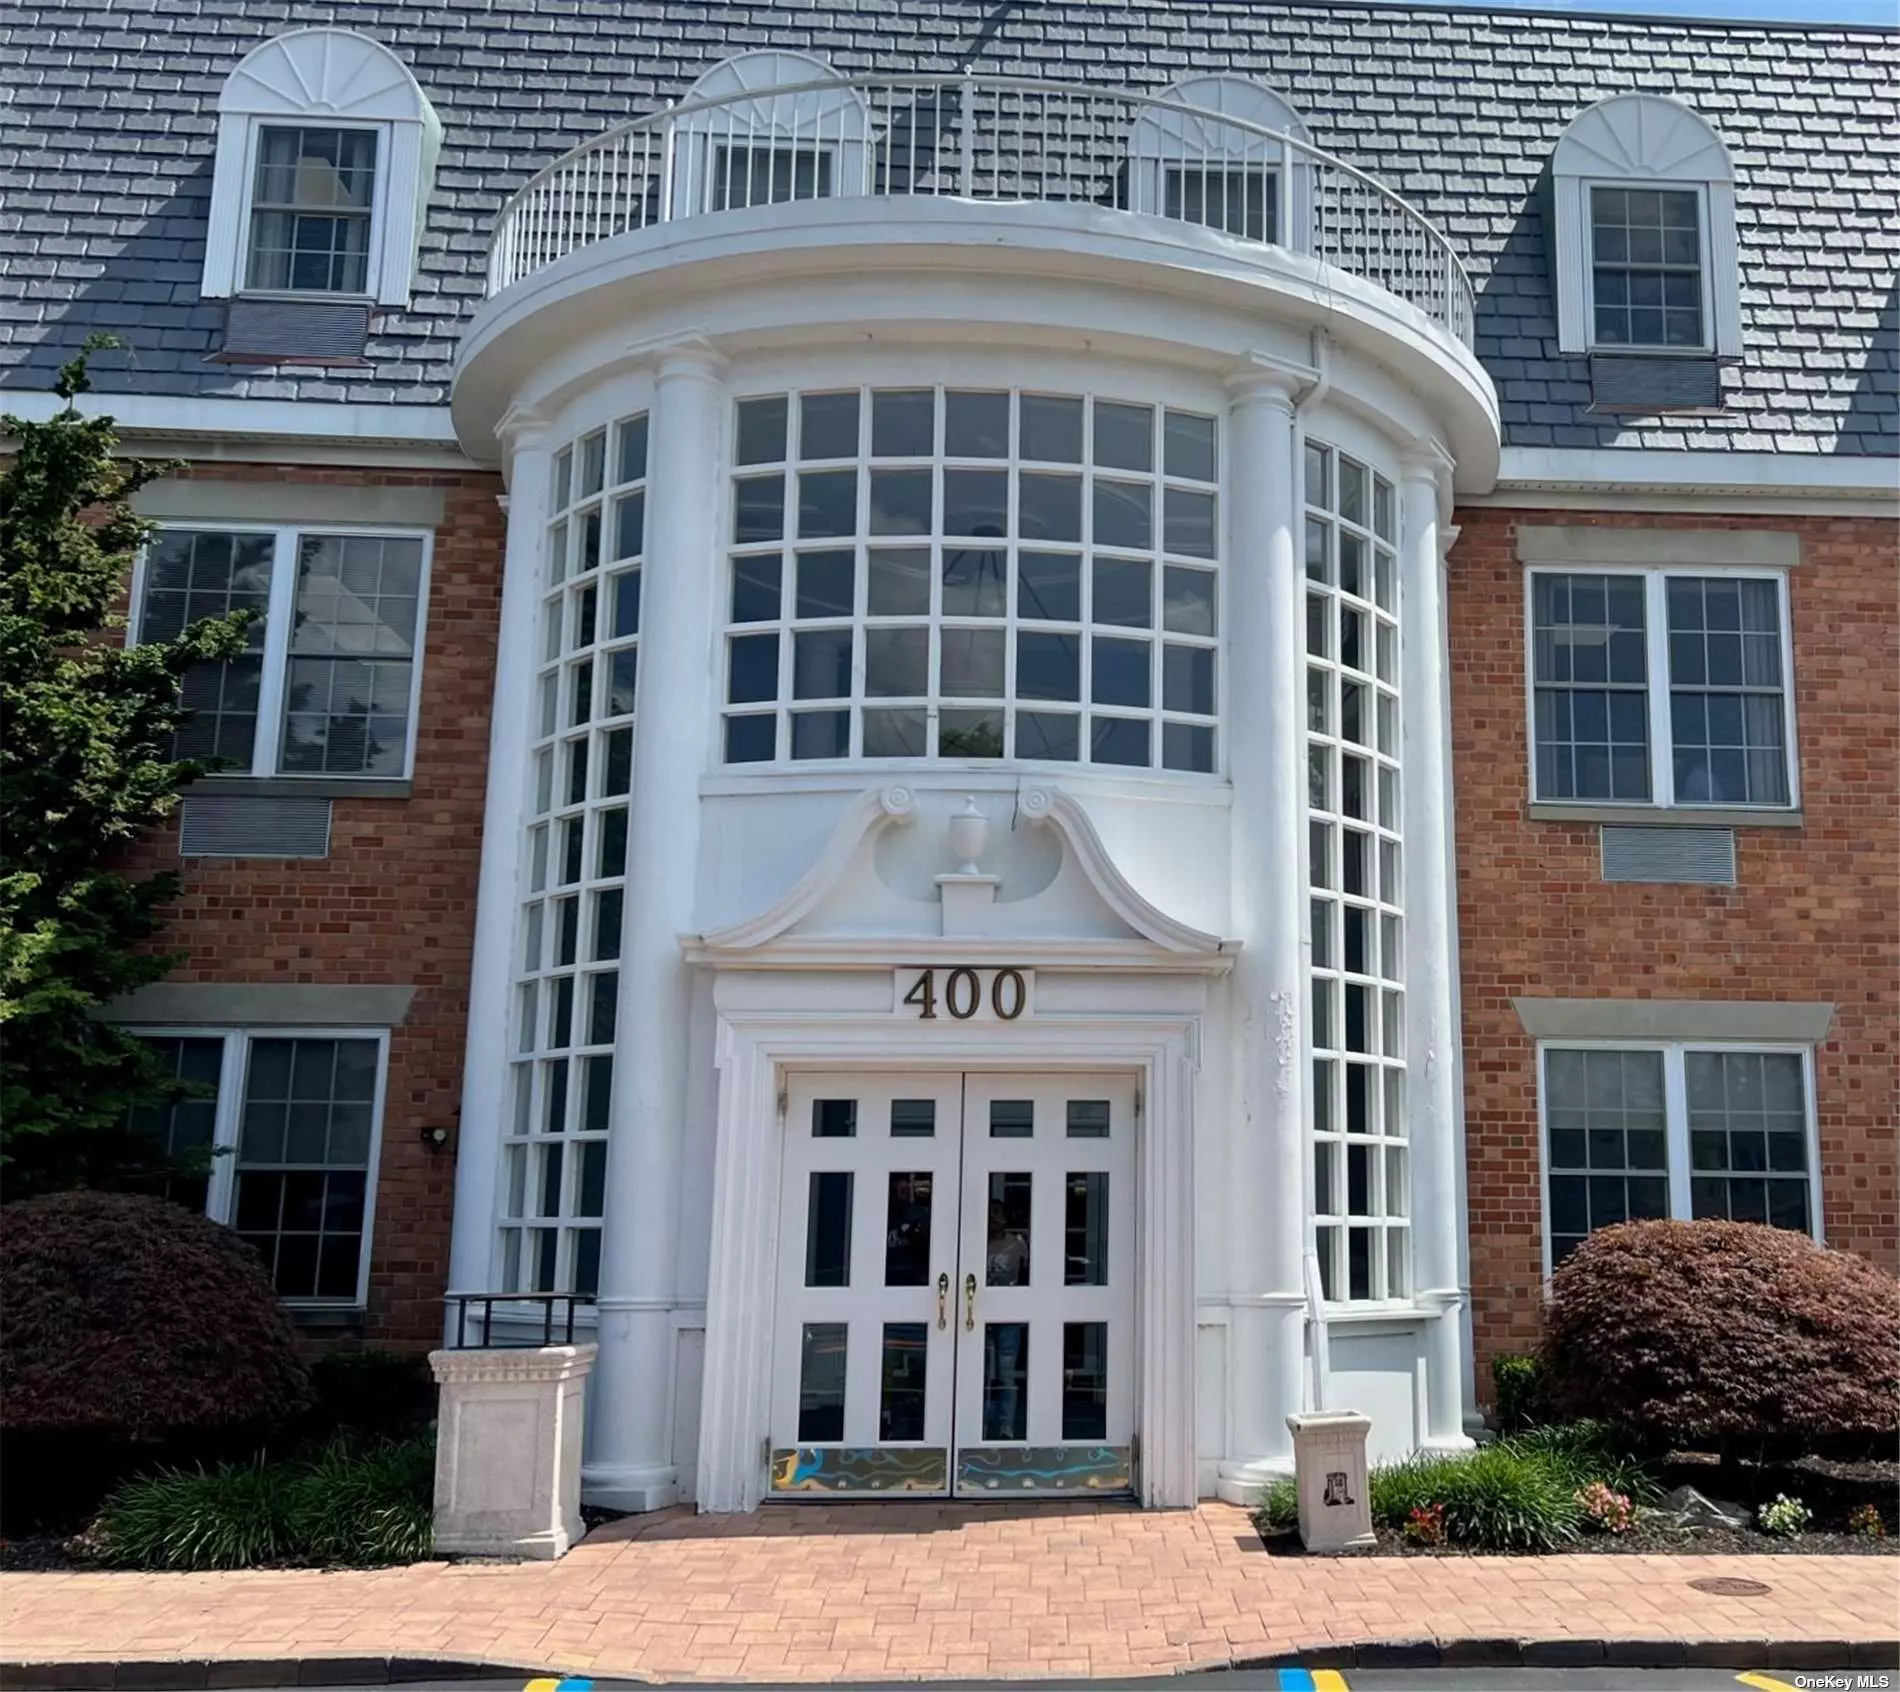 Beautiful 3229 sq ft Class A Medical Office Space in a Grand Colonial style Class B Building. Located at a very busy intersection of Rte. 109 & Montauk Hwy (W. Main St), the building is hard to miss! $200, 000 renovation just 2 years ago in this suite alone! Ten private exam rooms plus Admin office, large reception area, huge waiting room, private bathroom in the suite, staff break room, storage closets and more. This is a premier office environment for any medical user.